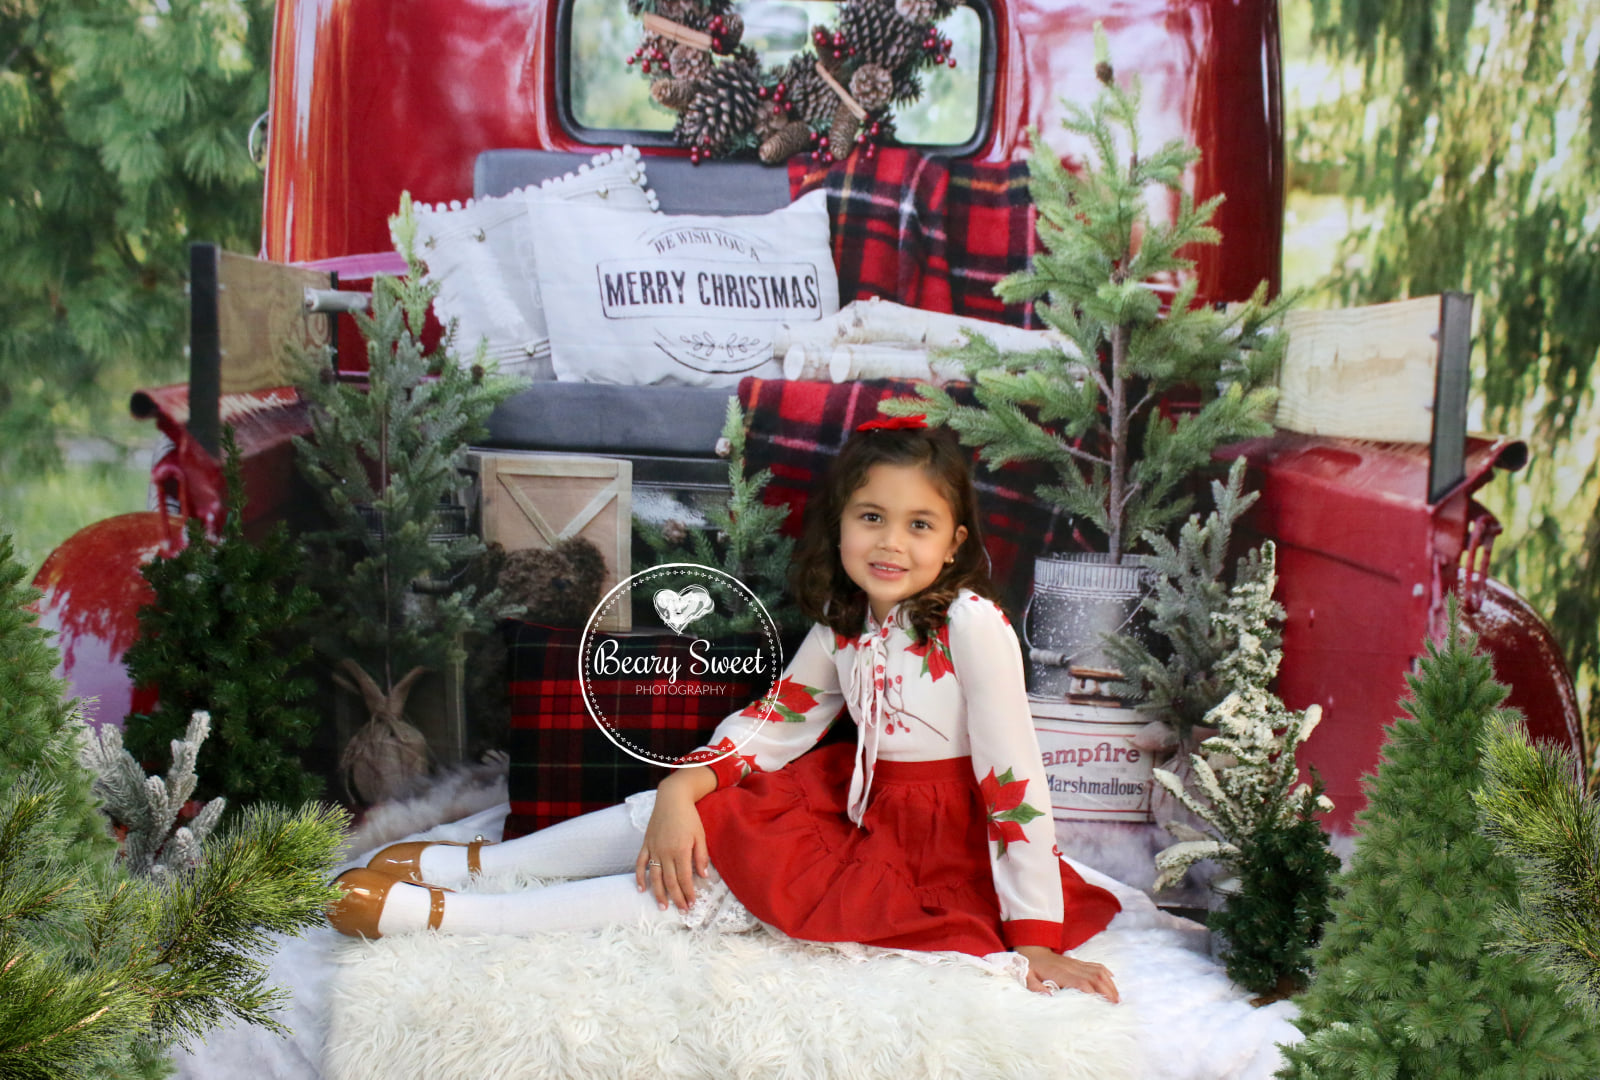 Kate Red Christmas Truck Backdrop Designed by Mandy Ringe Photography (only ship to Canada)